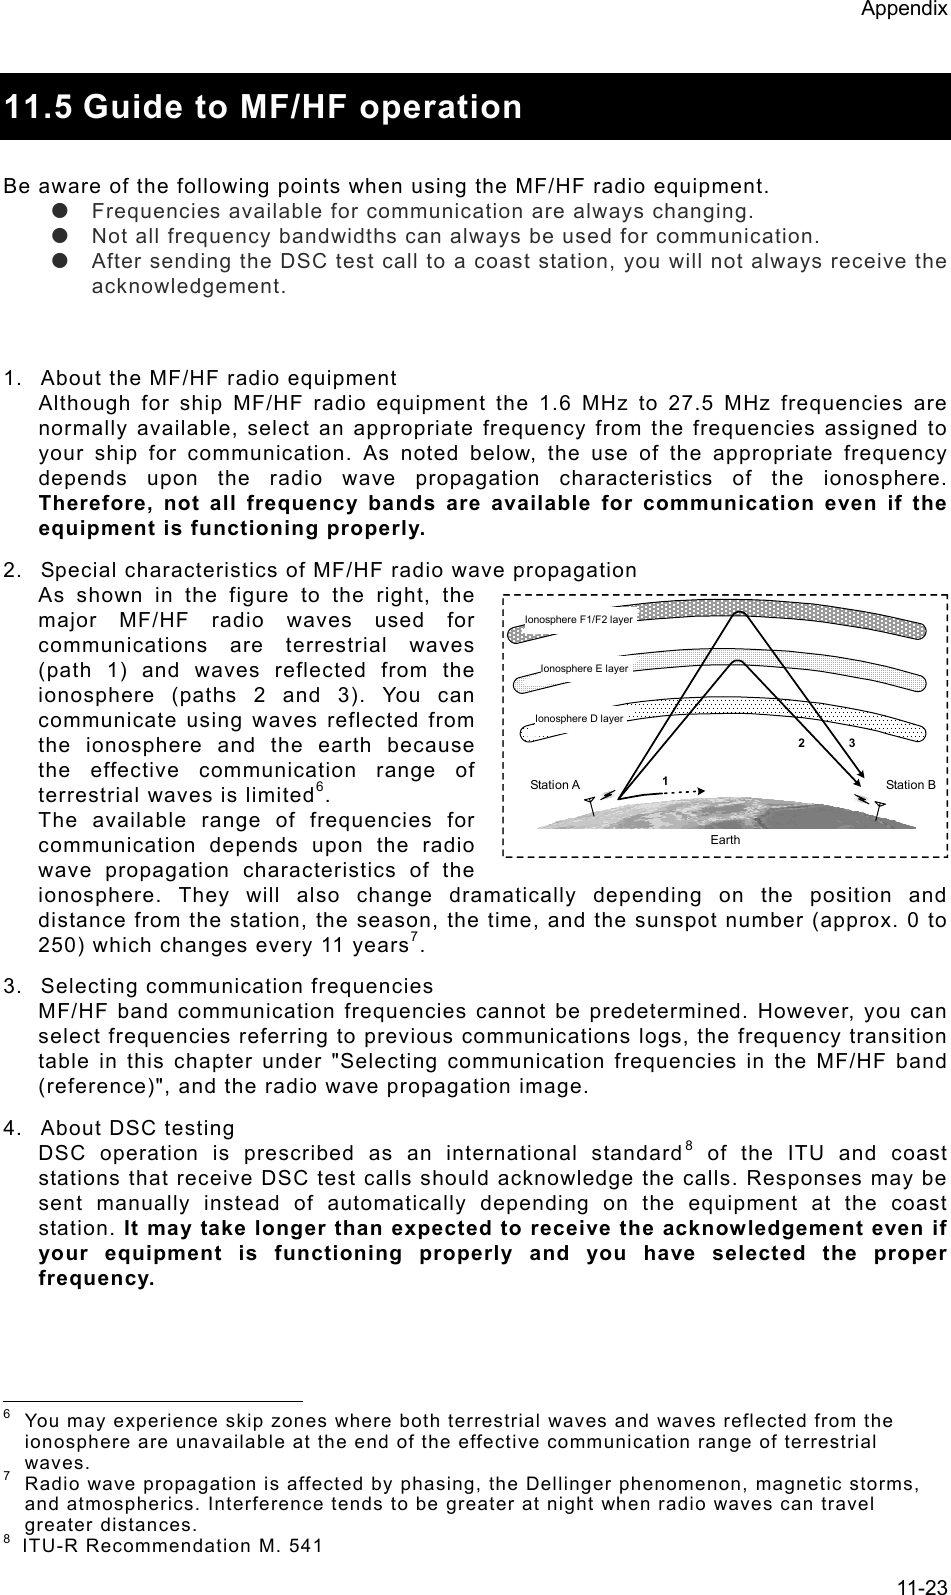 Appendix  11-23  11.5 Guide to MF/HF operation    Be aware of the following points when using the MF/HF radio equipment.   z  Frequencies available for communication are always changing.   z  Not all frequency bandwidths can always be used for communication.   z  After sending the DSC test call to a coast station, you will not always receive the acknowledgement.    1.  About the MF/HF radio equipment   Although for ship MF/HF radio equipment the 1.6 MHz to 27.5 MHz frequencies are normally available, select an appropriate frequency from the frequencies assigned to your ship for communication. As noted below, the use of the appropriate frequency depends upon the radio wave propagation characteristics of the ionosphere. Therefore, not all frequency bands are available for communication even if the equipment is functioning properly.   2.  Special characteristics of MF/HF radio wave propagation   As shown in the figure to the right, the major MF/HF radio waves used for communications are terrestrial waves (path 1) and waves reflected from the ionosphere (paths 2 and 3). You can communicate using waves reflected from the ionosphere and the earth because the effective communication range of terrestrial waves is limited6.  The available range of frequencies for communication depends upon the radio wave propagation characteristics of the ionosphere. They will also change dramatically depending on the position and distance from the station, the season, the time, and the sunspot number (approx. 0 to 250) which changes every 11 years7.  3.  Selecting communication frequencies   MF/HF band communication frequencies cannot be predetermined. However, you can select frequencies referring to previous communications logs, the frequency transition table in this chapter under &quot;Selecting communication frequencies in the MF/HF band (reference)&quot;, and the radio wave propagation image.   4.  About DSC testing   DSC operation is prescribed as an international standard8 of the ITU and coast stations that receive DSC test calls should acknowledge the calls. Responses may be sent manually instead of automatically depending on the equipment at the coast station. It may take longer than expected to receive the acknowledgement even if your equipment is functioning properly and you have selected the proper frequency.                                                          6  You may experience skip zones where both terrestrial waves and waves reflected from the ionosphere are unavailable at the end of the effective communication range of terrestrial waves.  7  Radio wave propagation is affected by phasing, the Dellinger phenomenon, magnetic storms, and atmospherics. Interference tends to be greater at night when radio waves can travel greater distances.   8  ITU-R Recommendation M. 541   無線局 A23無線局 B1電離層　 F1/F2層電離層　 E層電離層　 D層地表Ionosphere F1/F2 layerIonosphere E layerIonosphere D layerStation AEarth Station B